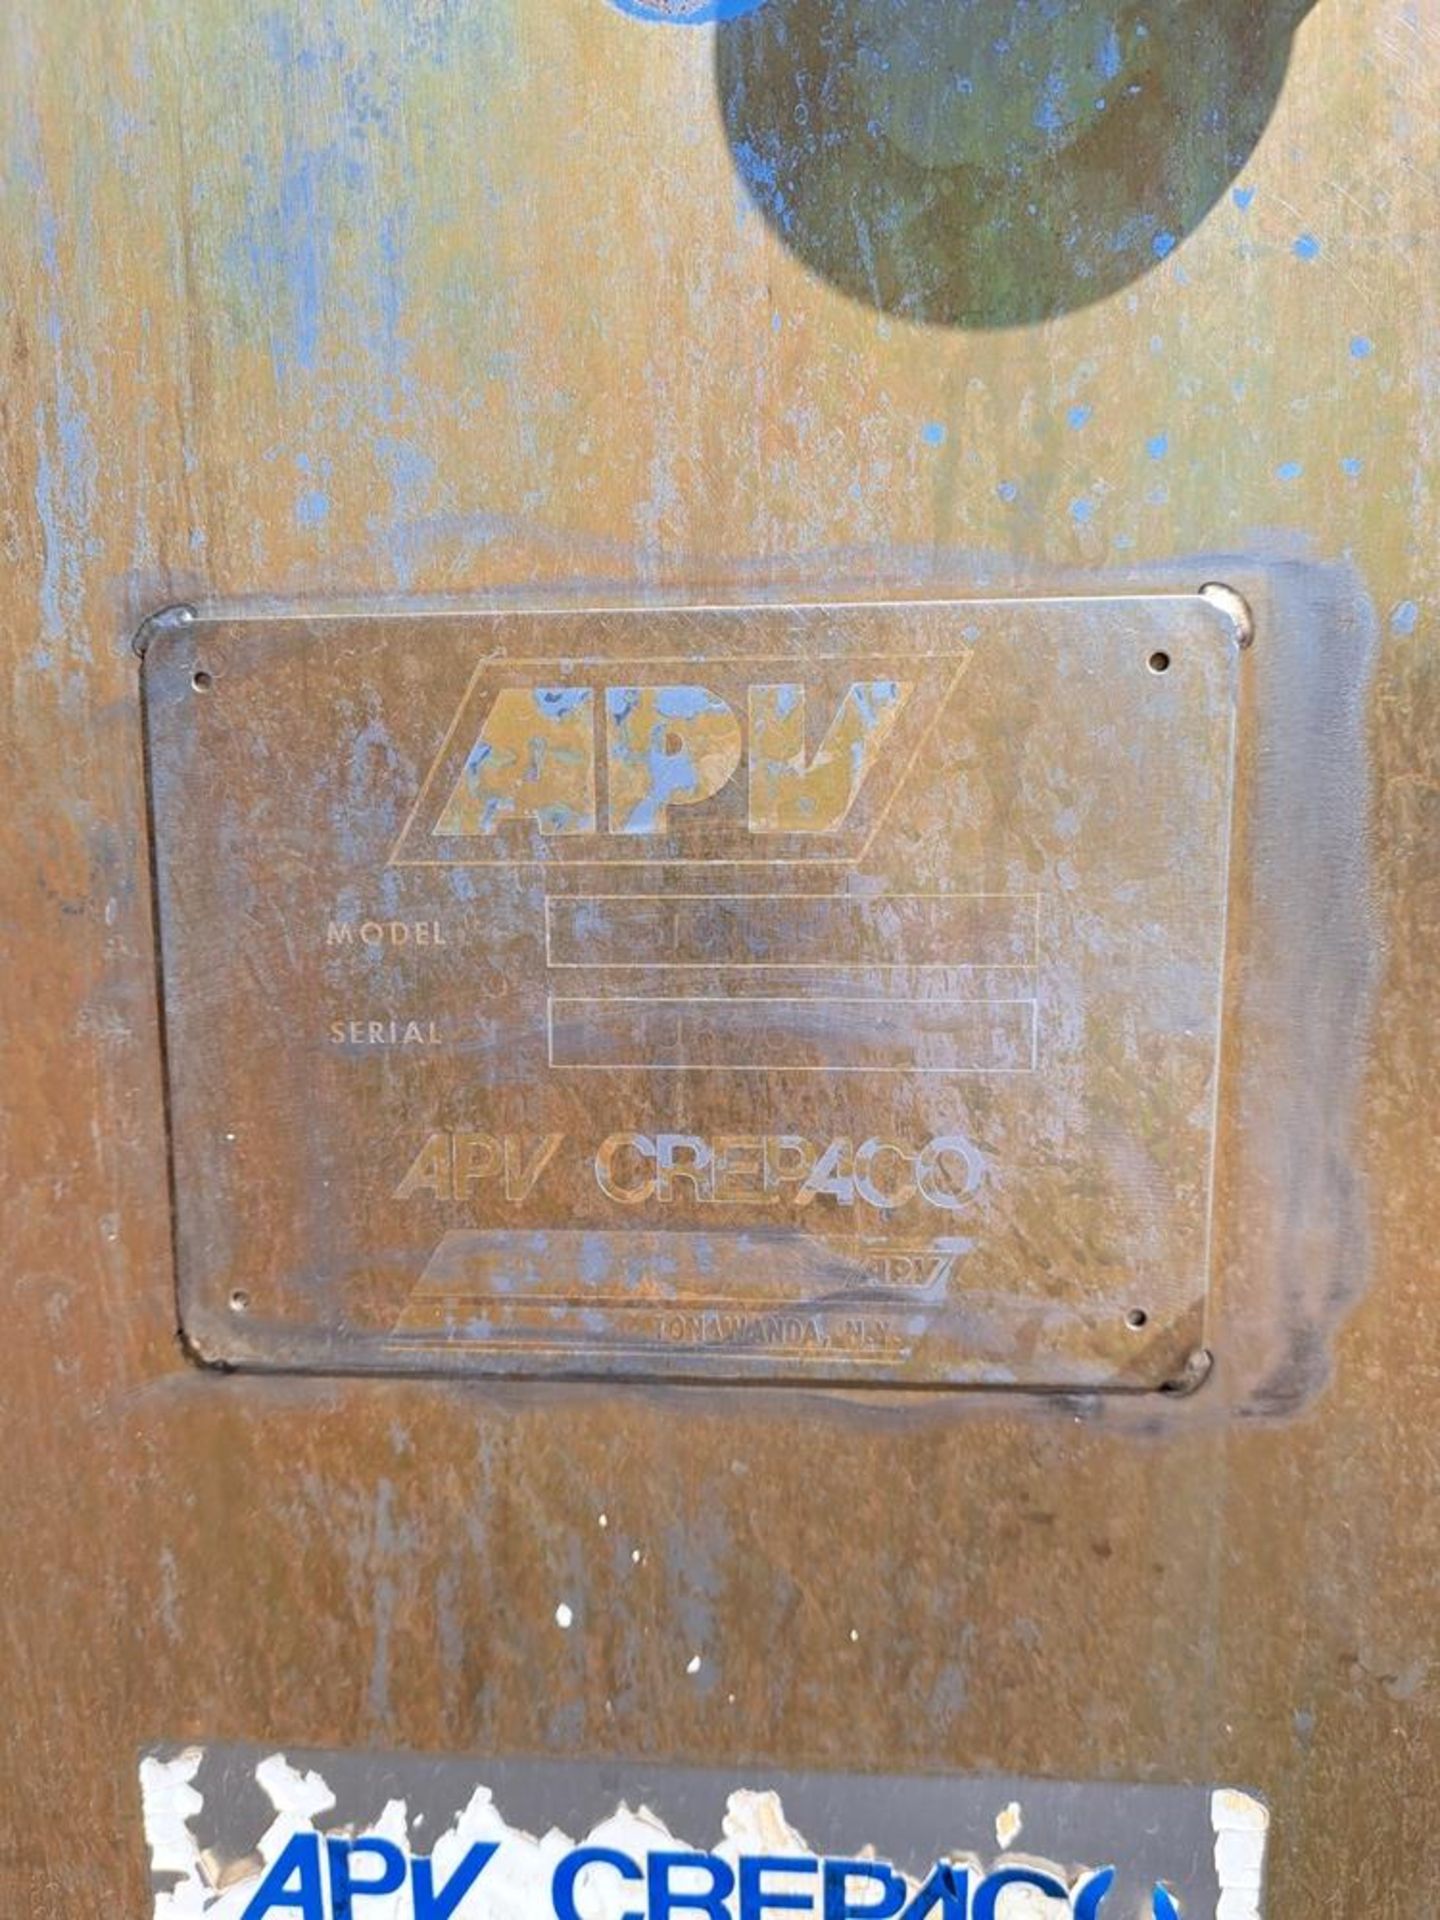 APV Crepaco Mdl. 310 Stainless Steel Expandable Heat Exchanger, Ser. #19696, 5' of usable space, - Bild 3 aus 3